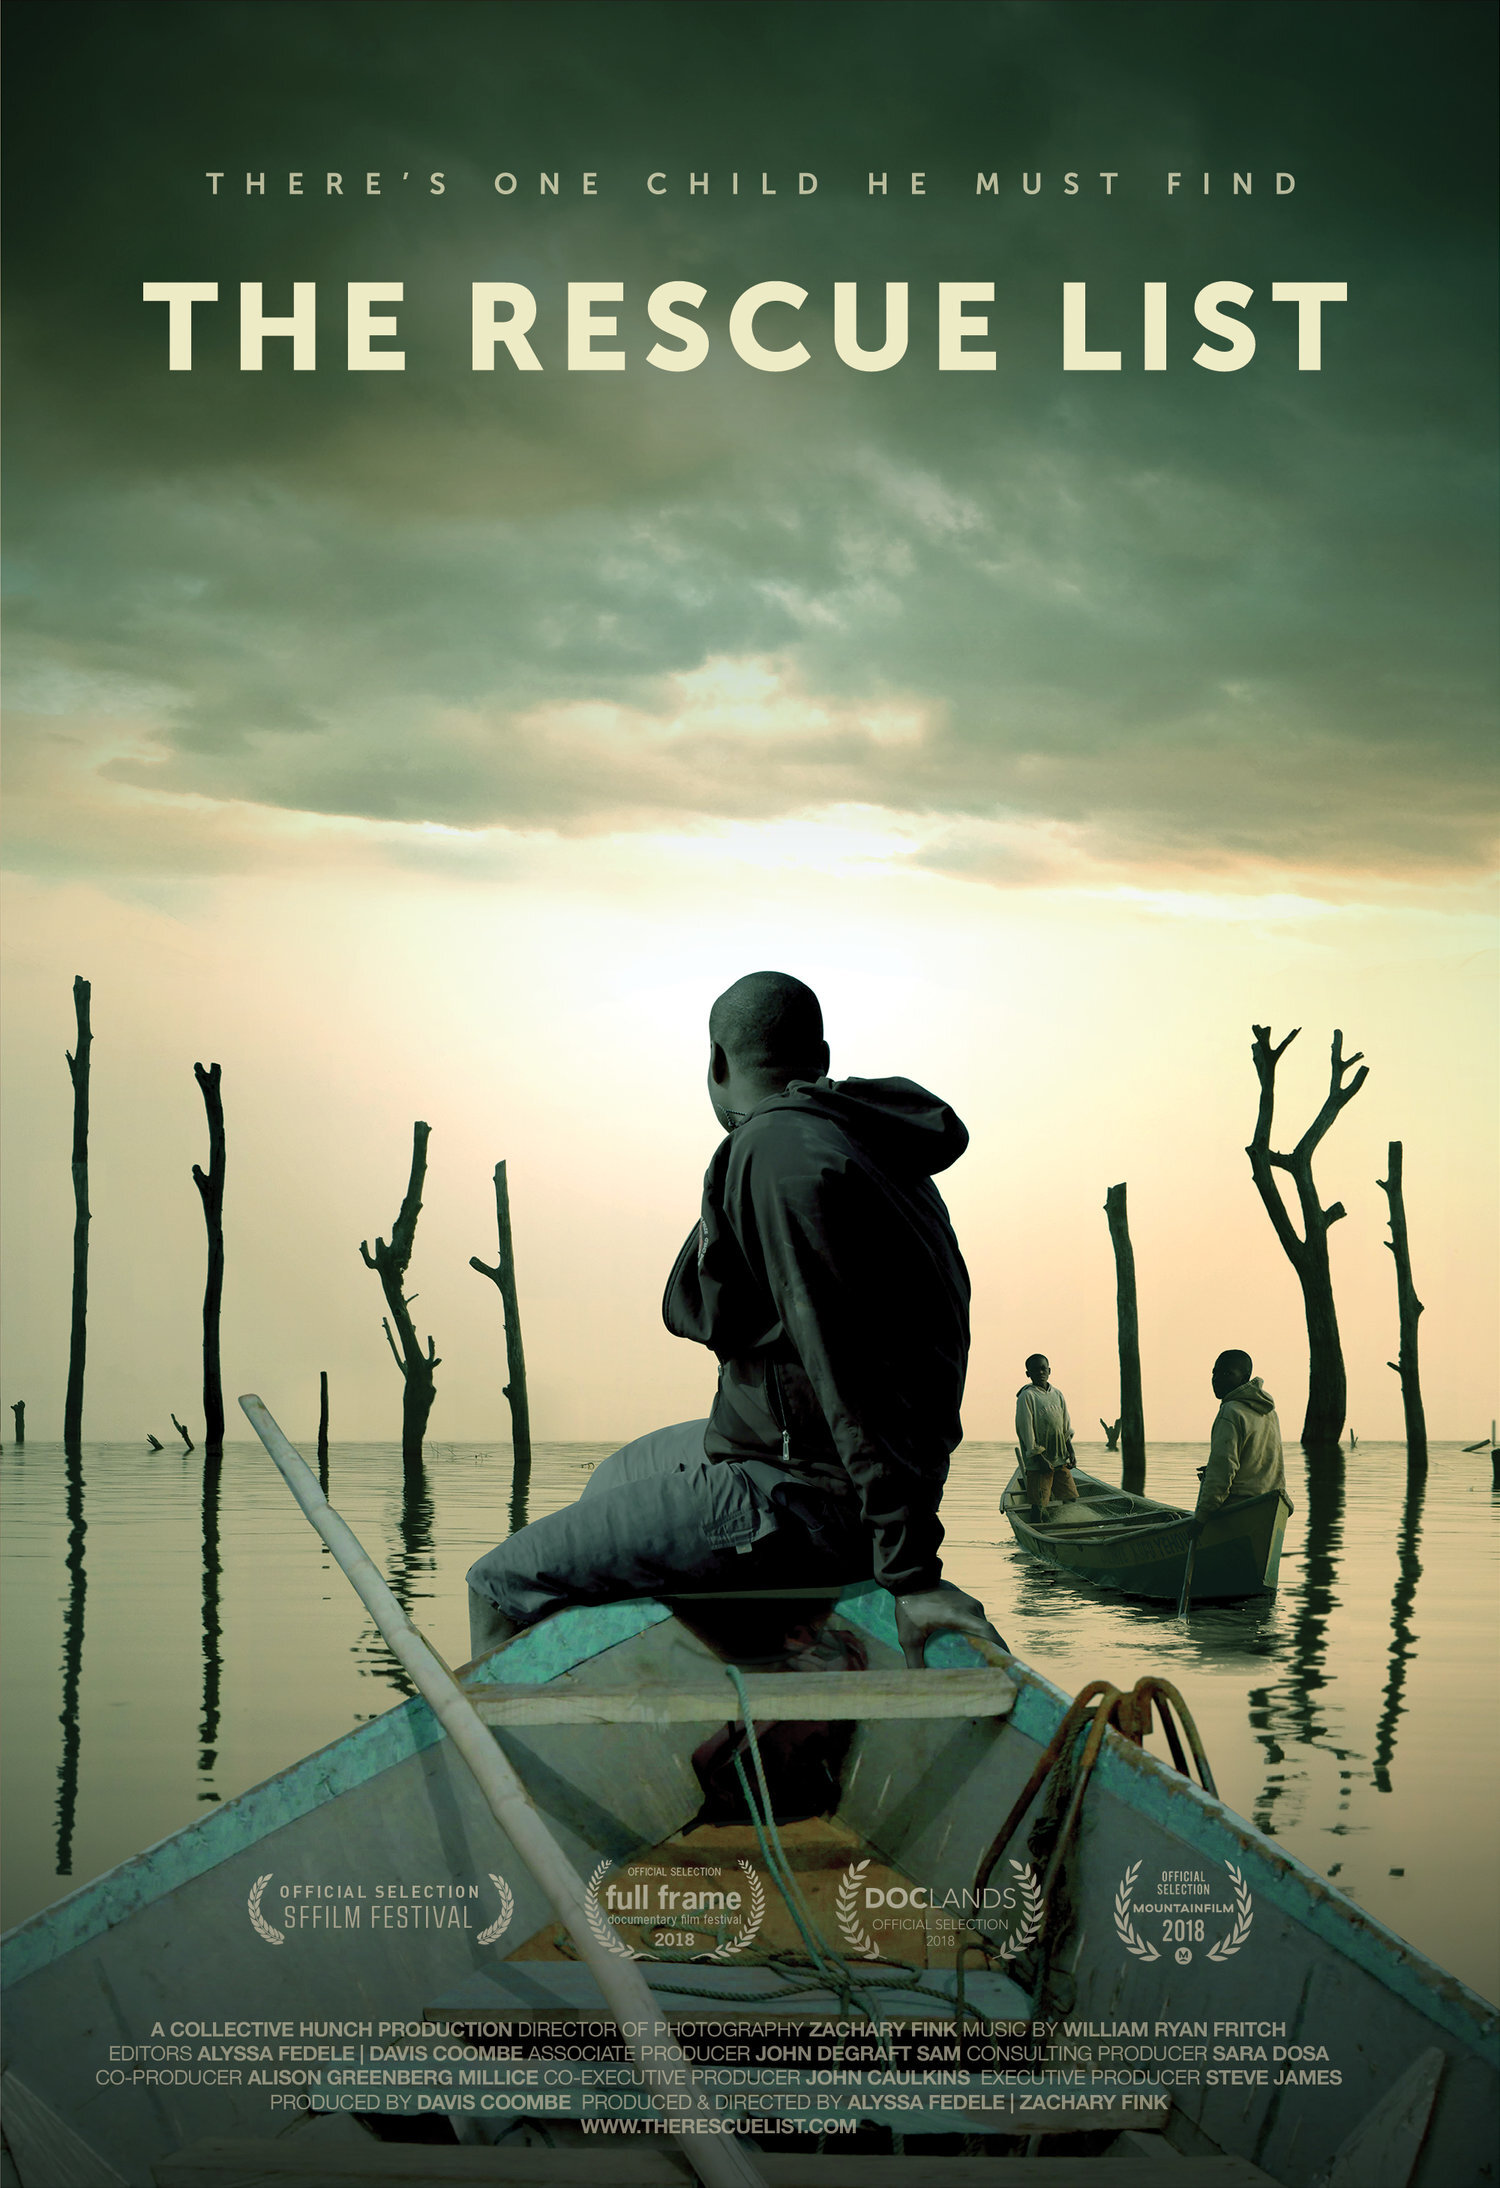 The Rescue List